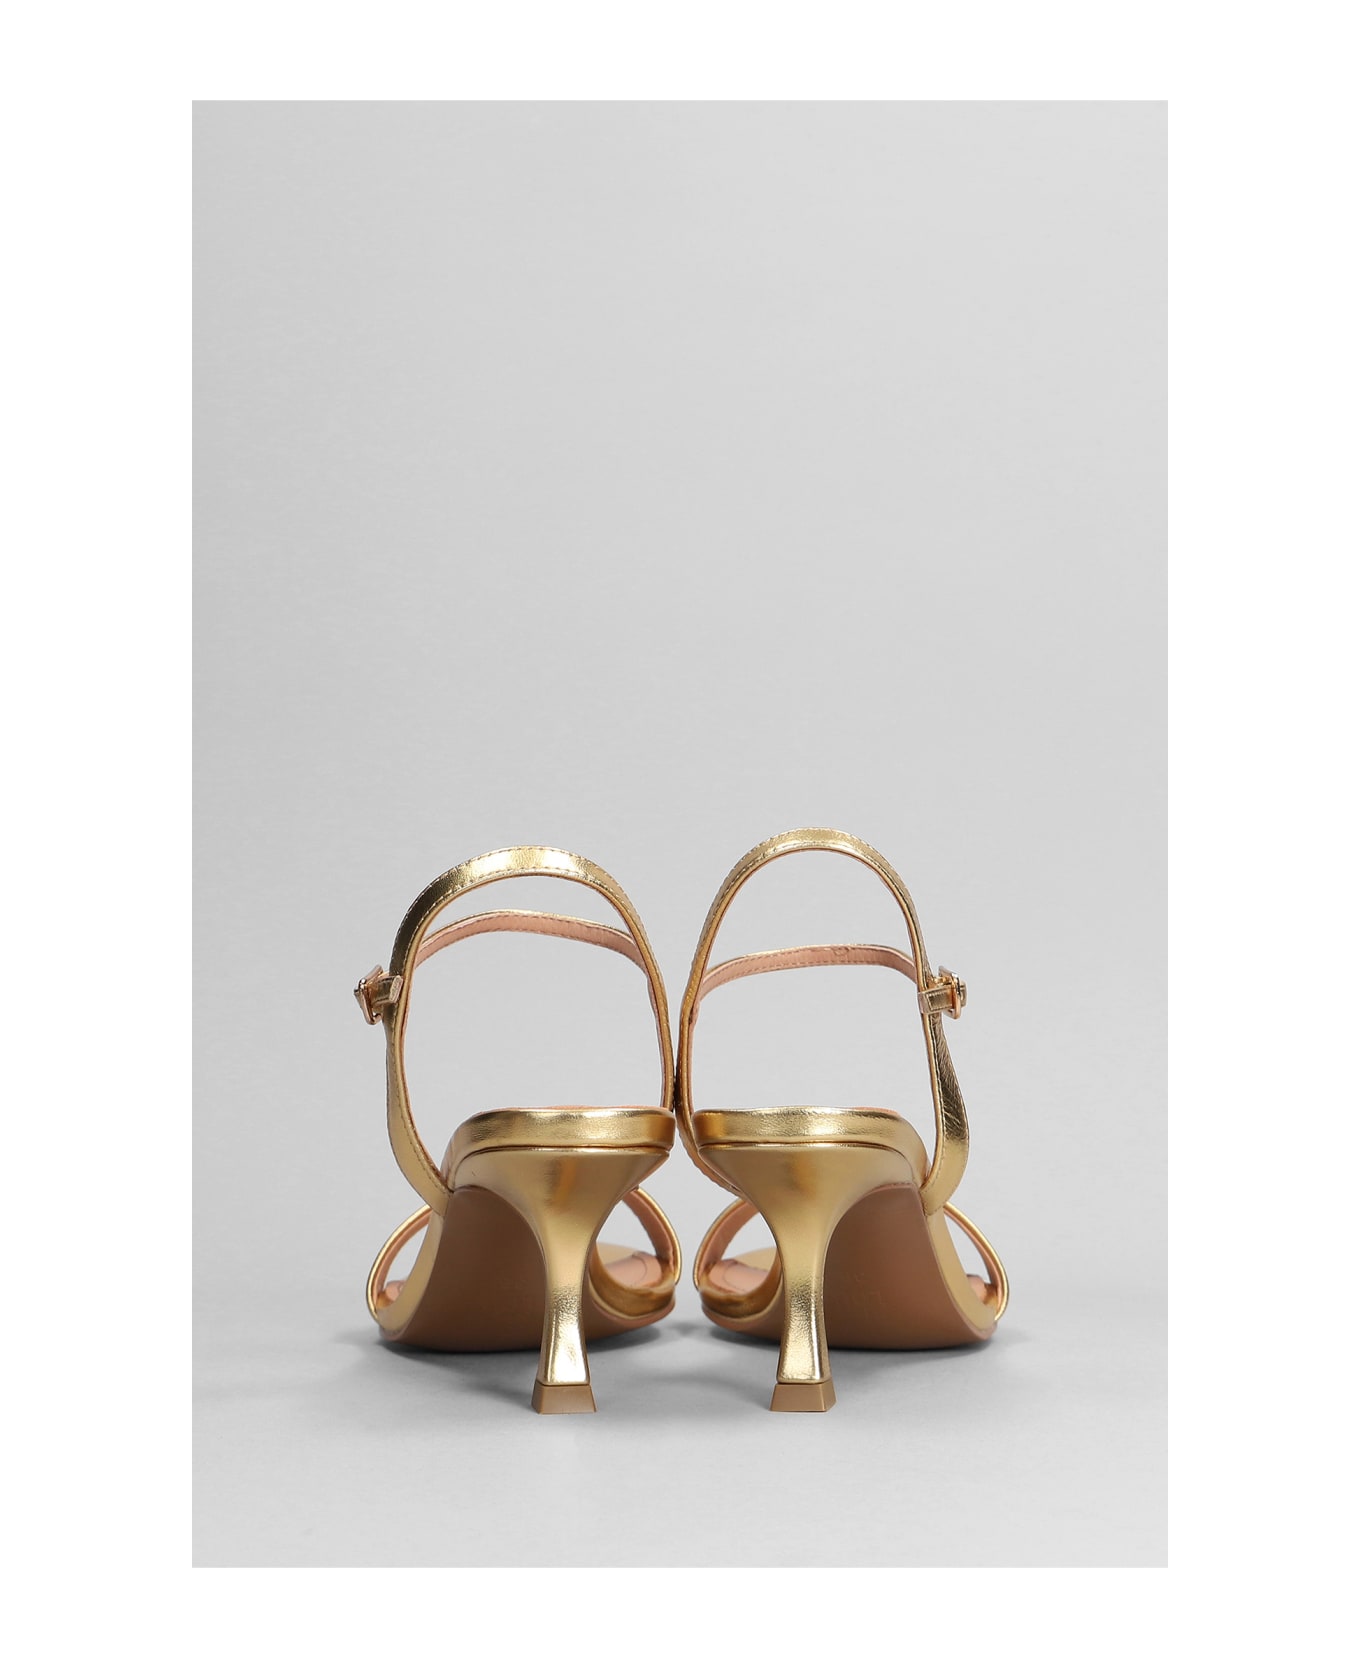 Bibi Lou Lotus 65 Sandals In Gold Leather - gold